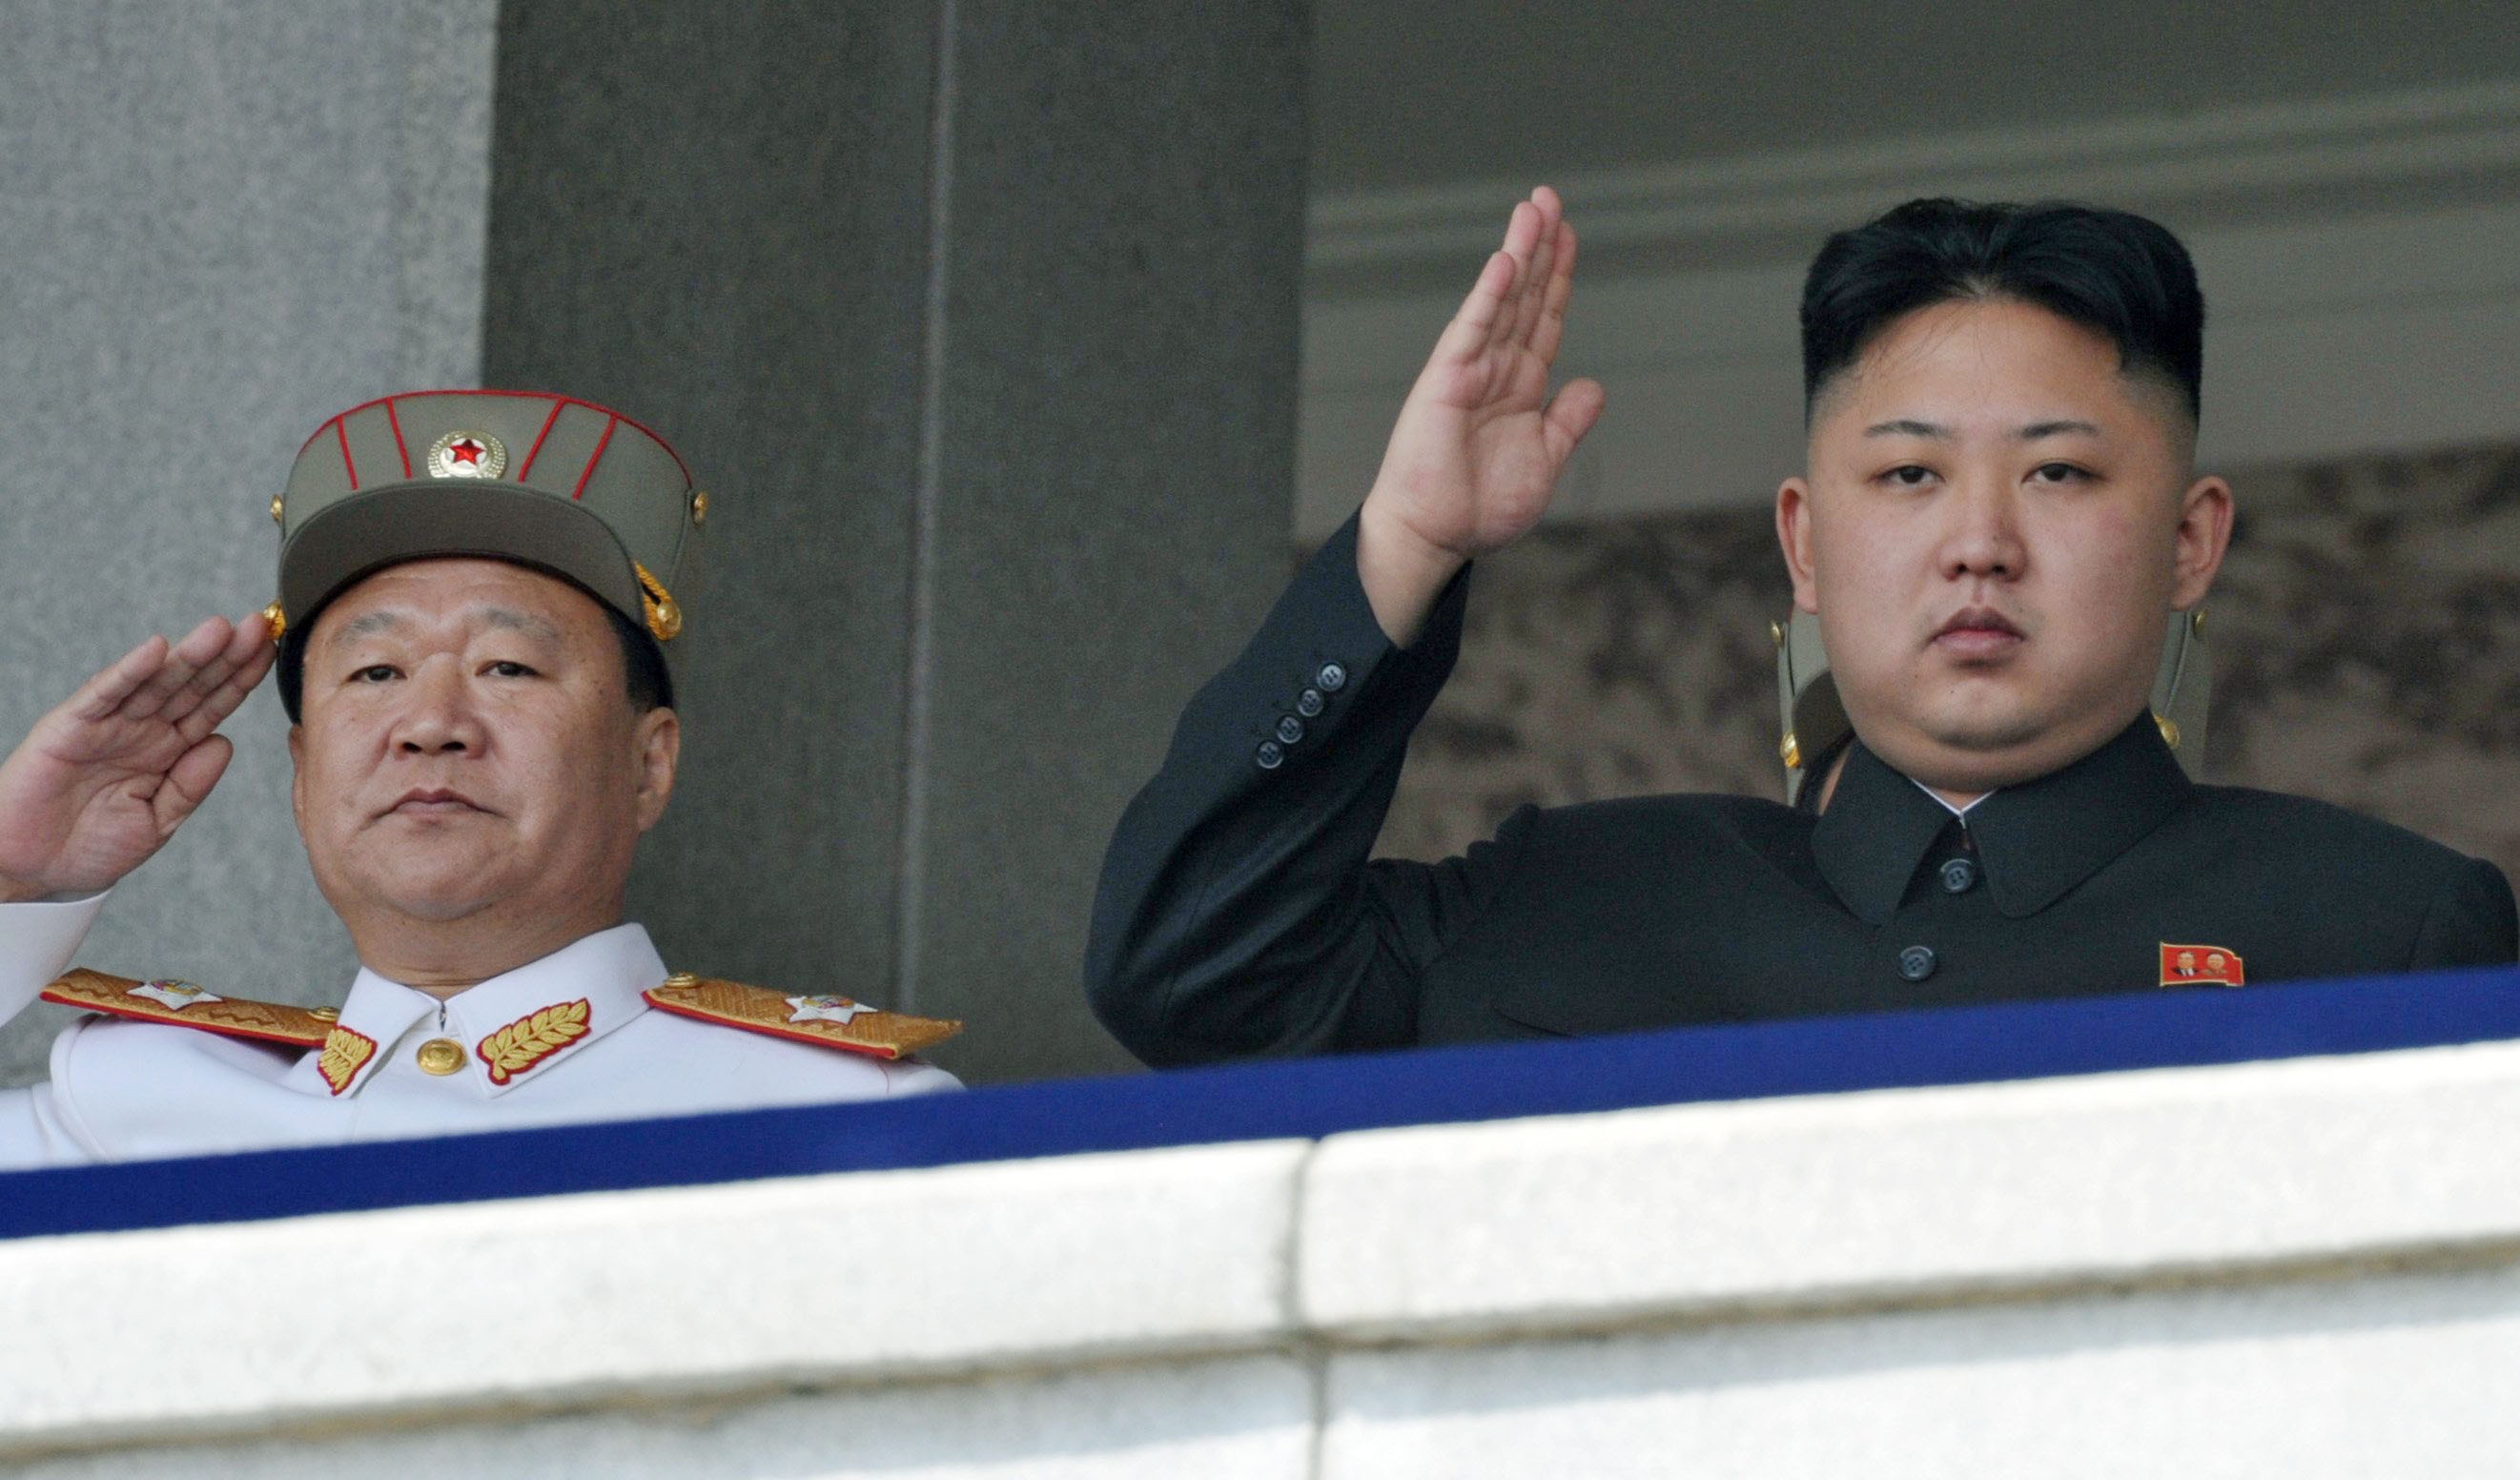 Kim Jong Un salutes during a military parade. He accused the U.S. of trying to "crush" North Korea militarily (Kyodo News—Associated Press)